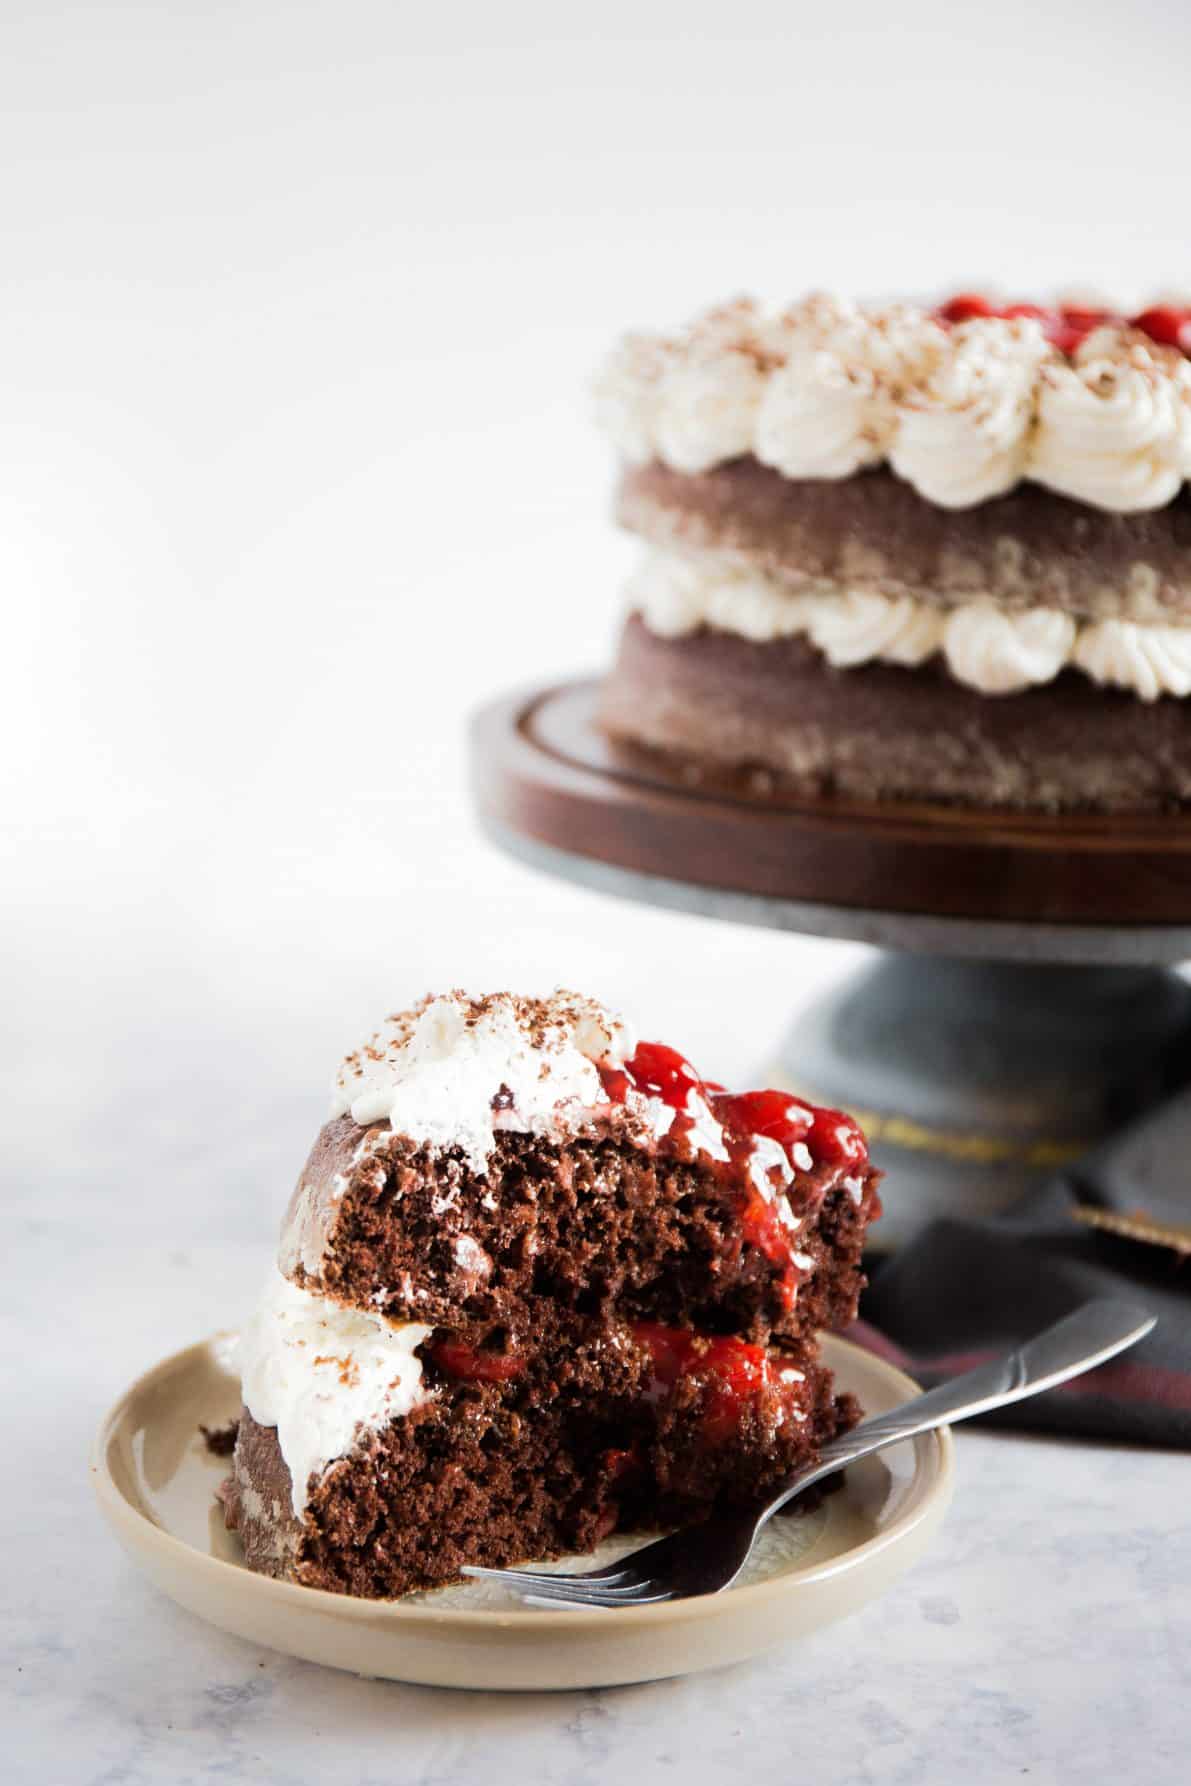 Piece of the black forest cake.